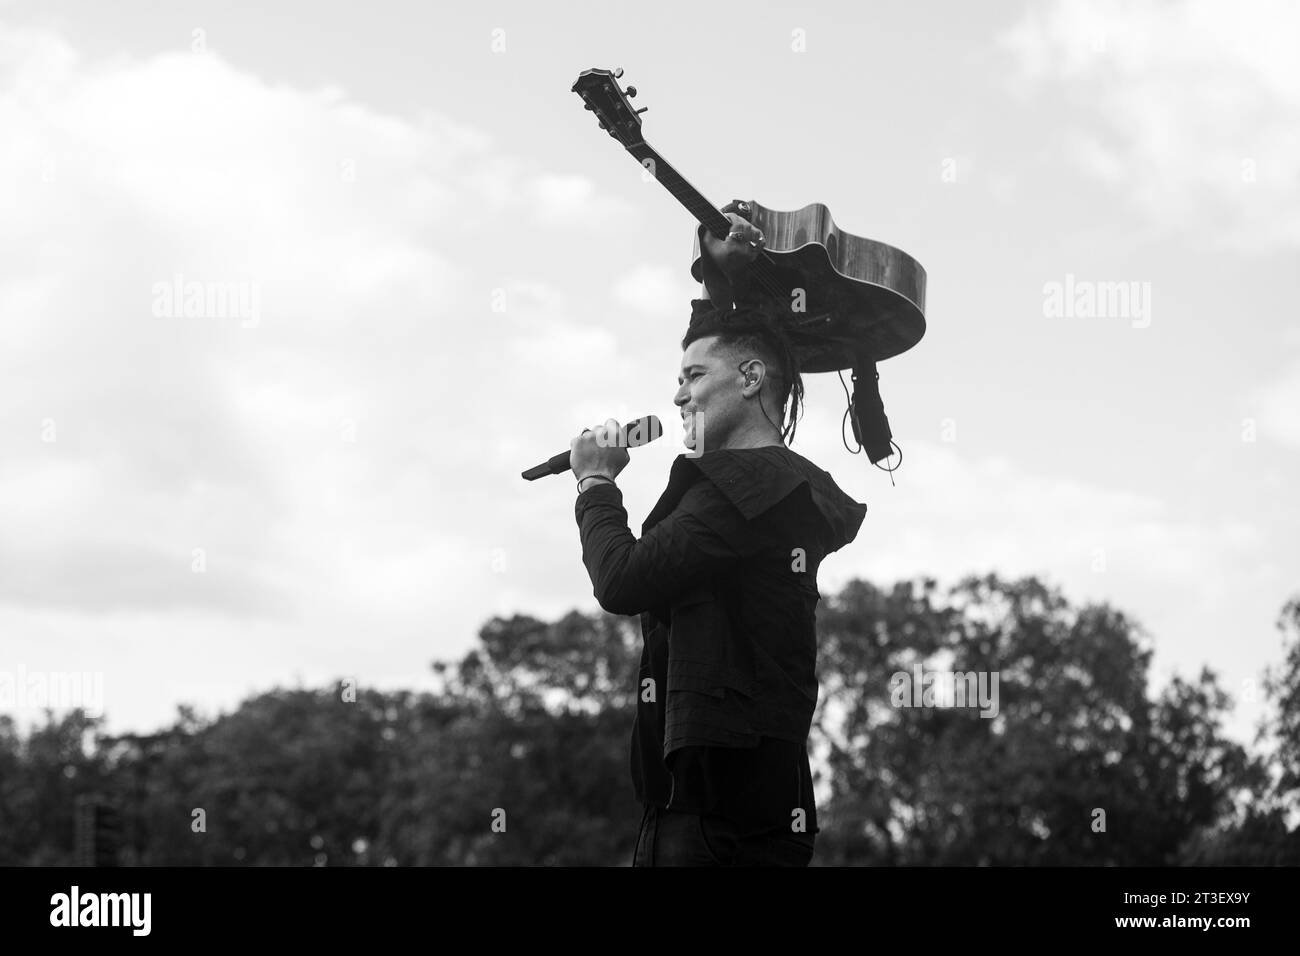 London, UK - July 1st, 2023: The Script | Danny O'Donoghue performing at American Express British Summertime in Hyde Park, London. Stock Photo